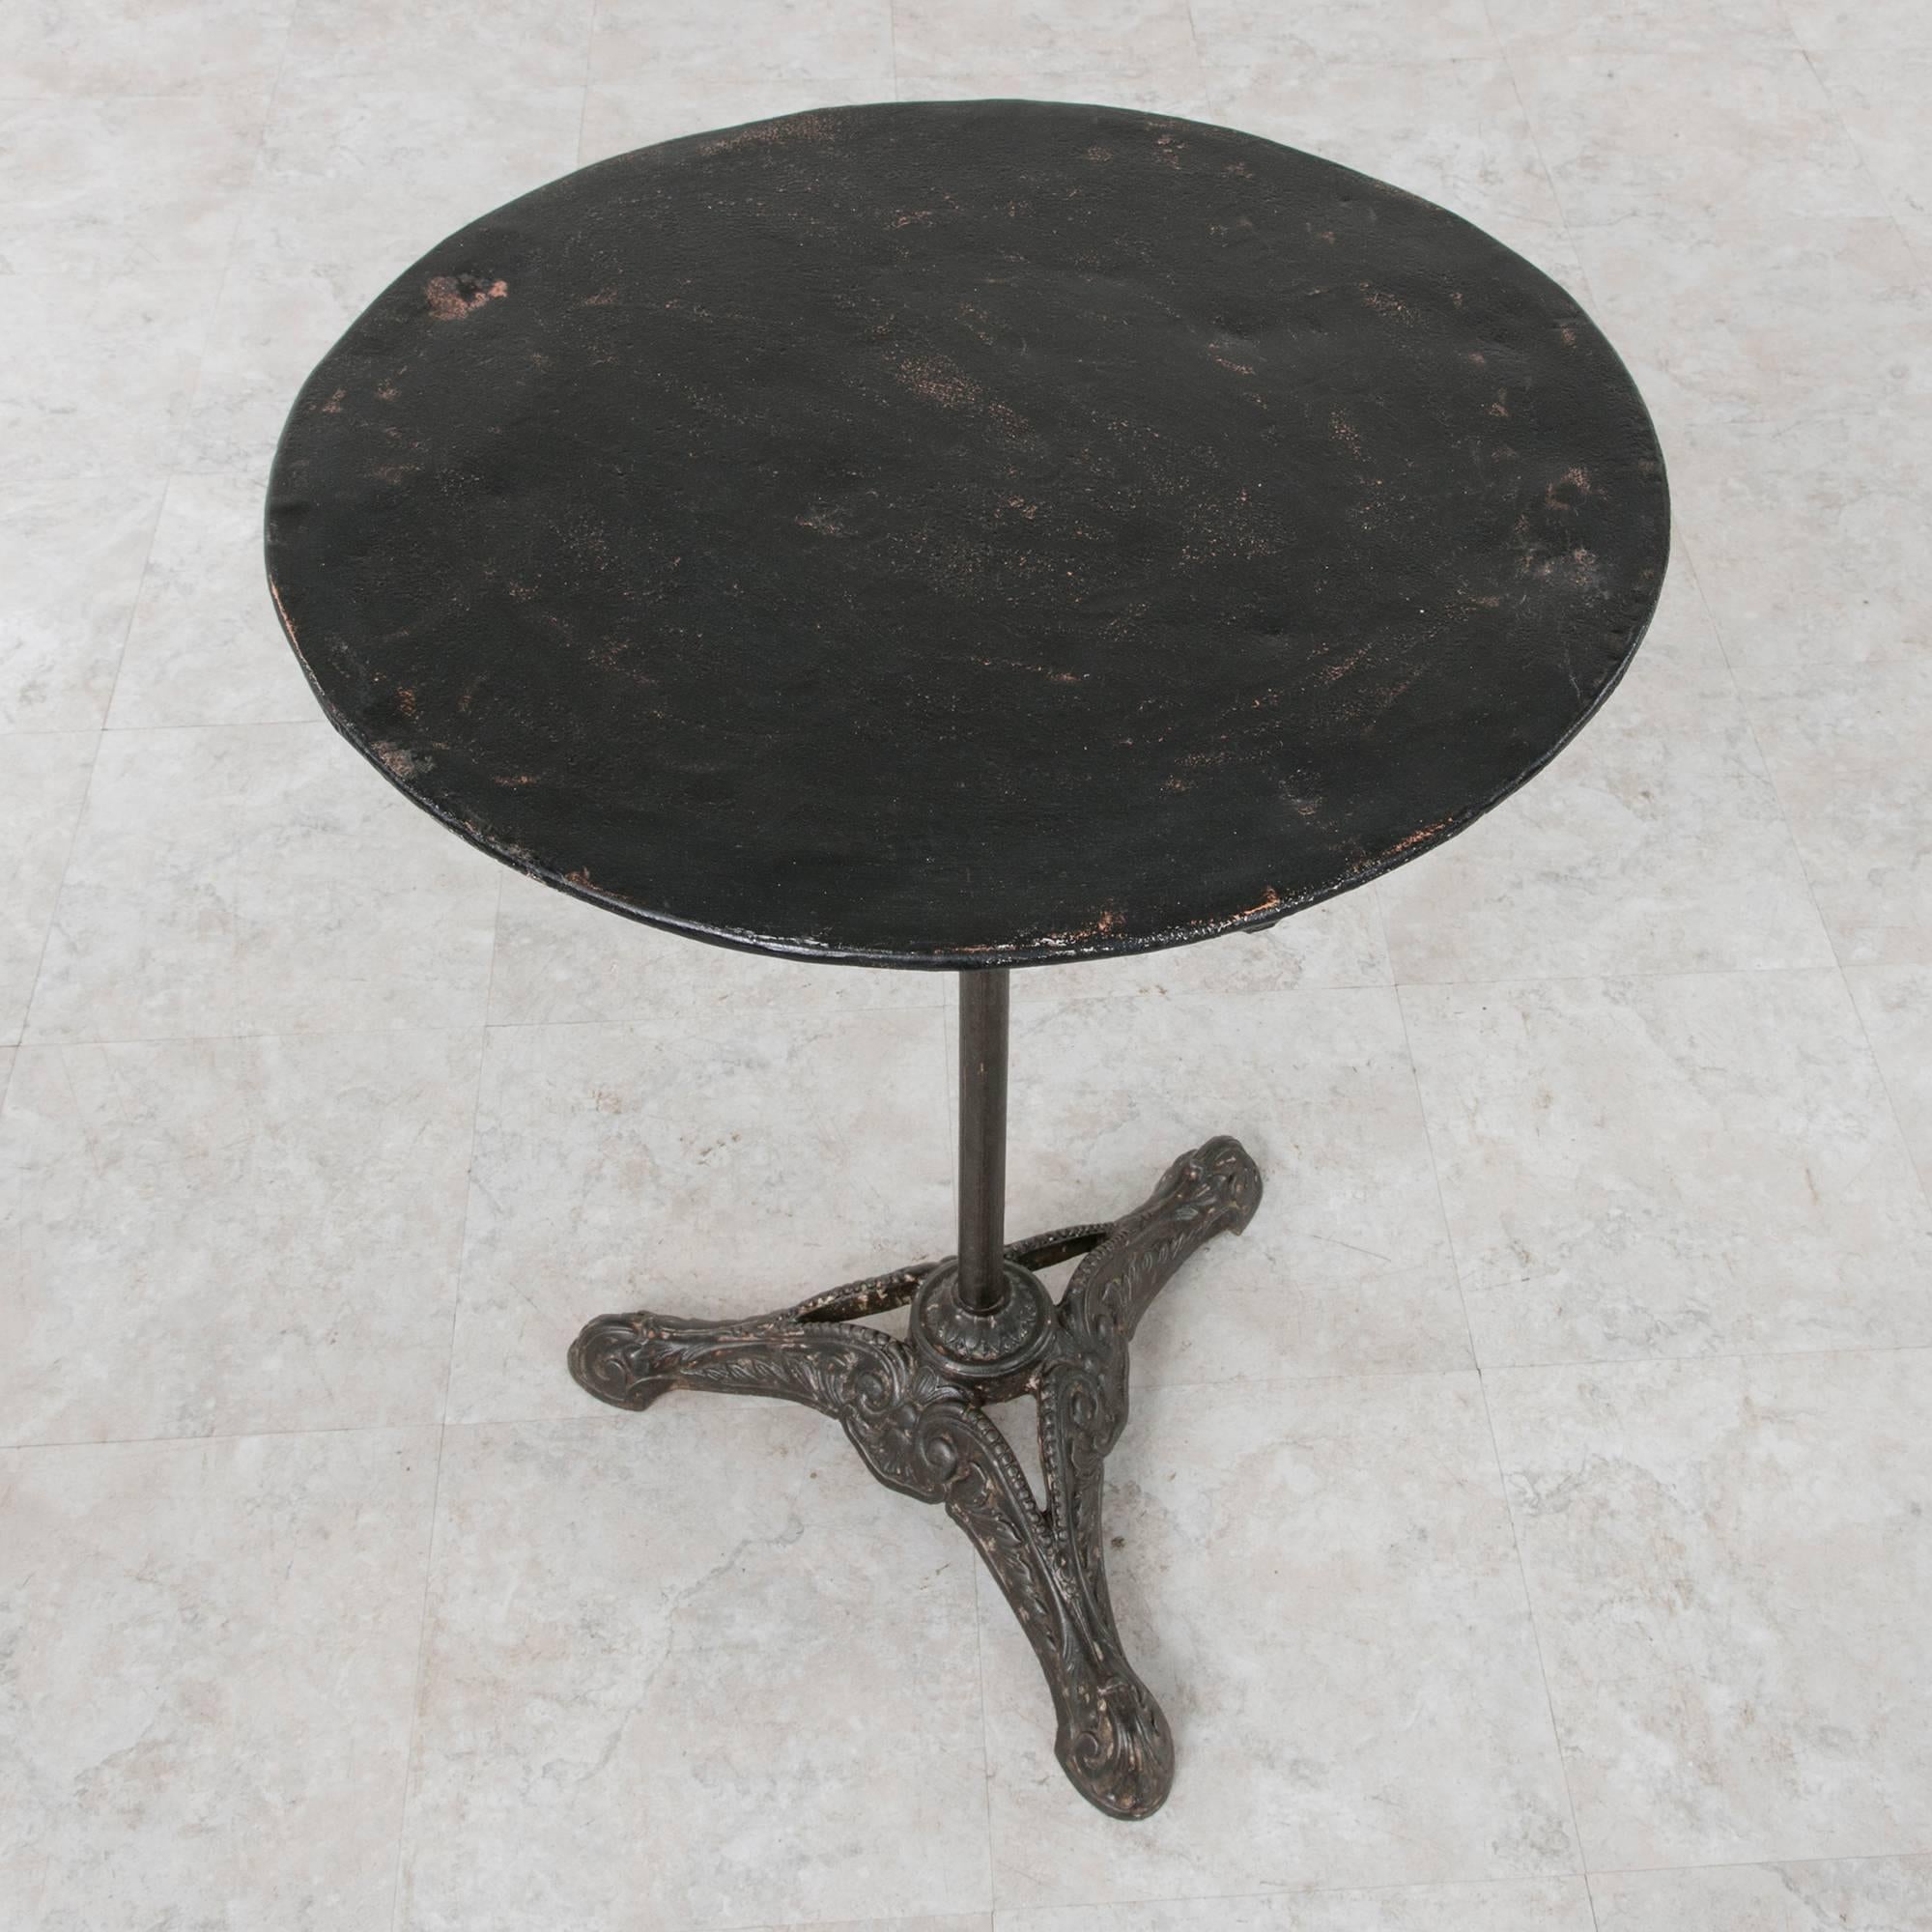 This iron bistro table from the turn of century boasts a Classic design that has stood the test of time in outdoor French cafes. Its heavy cast iron tripod base features escargot feet that transform into acanthus leaves with beaded accents. The